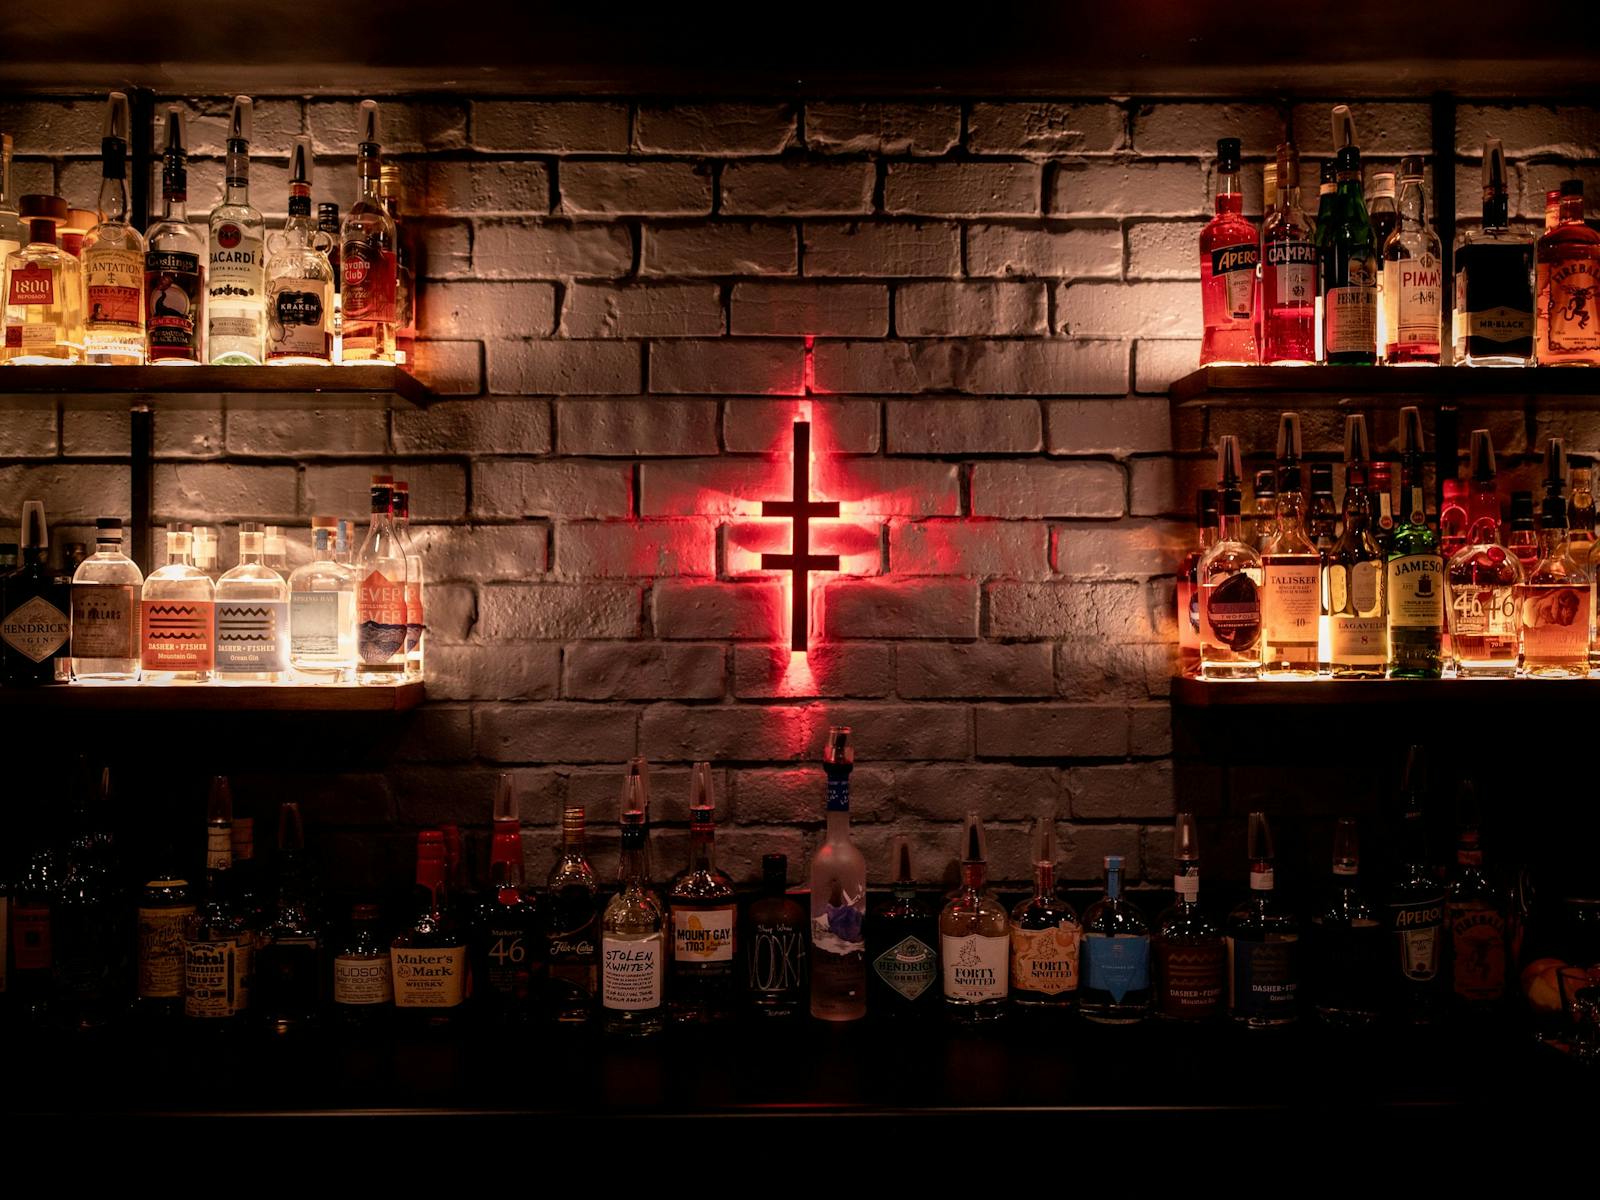 The Altar bar logo glows red on the wall.  Shelves on either side show a variety of alcohol bottles